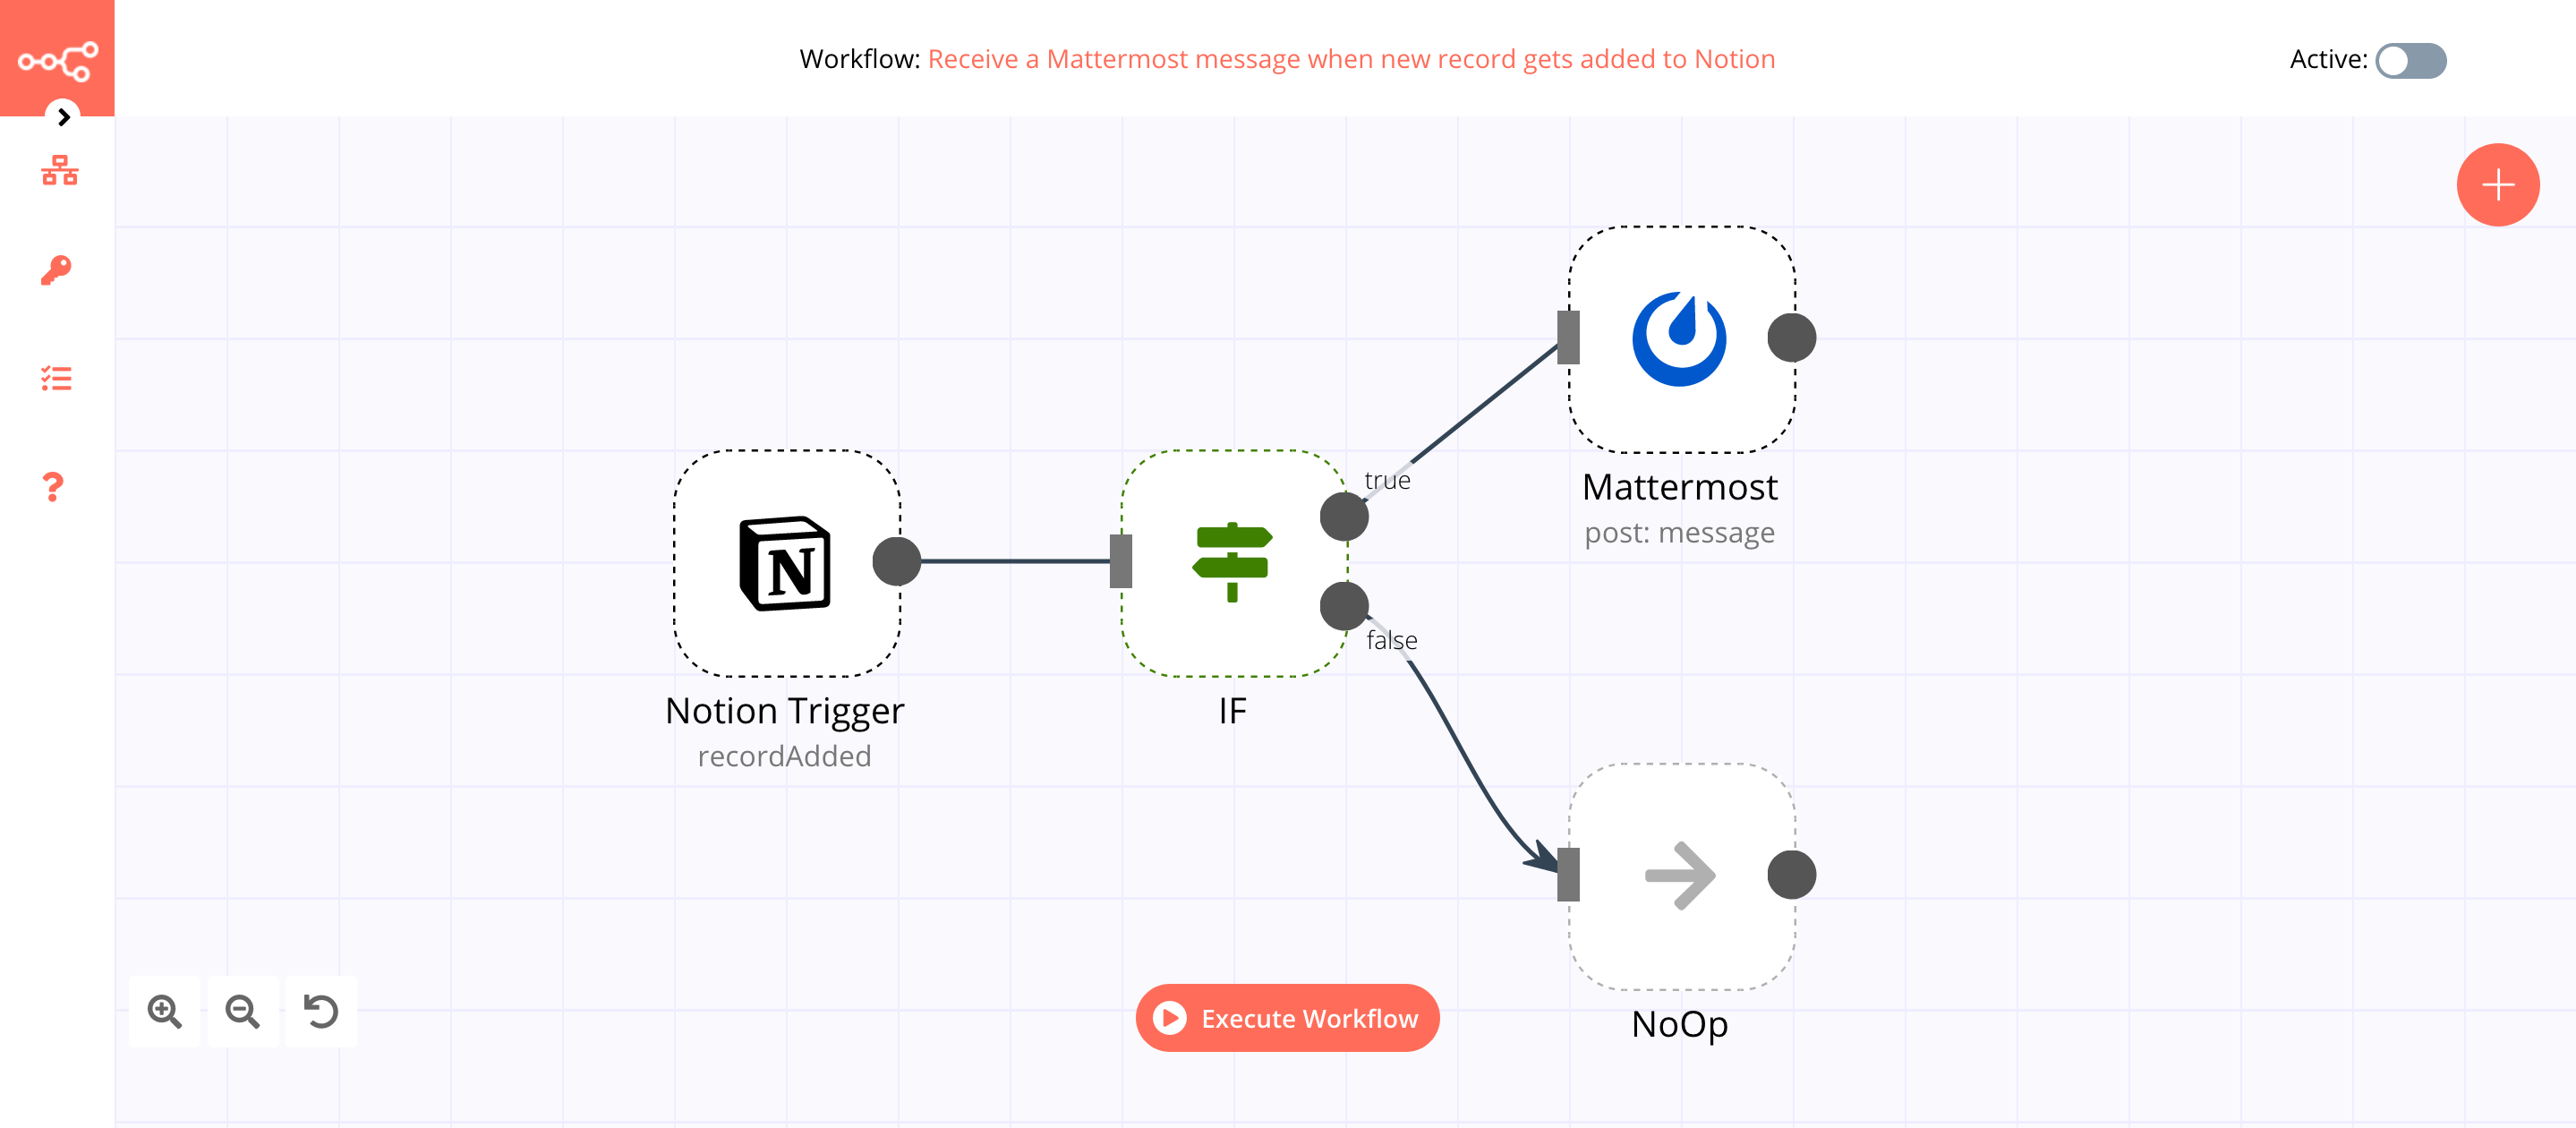 A workflow with the Notion Trigger node